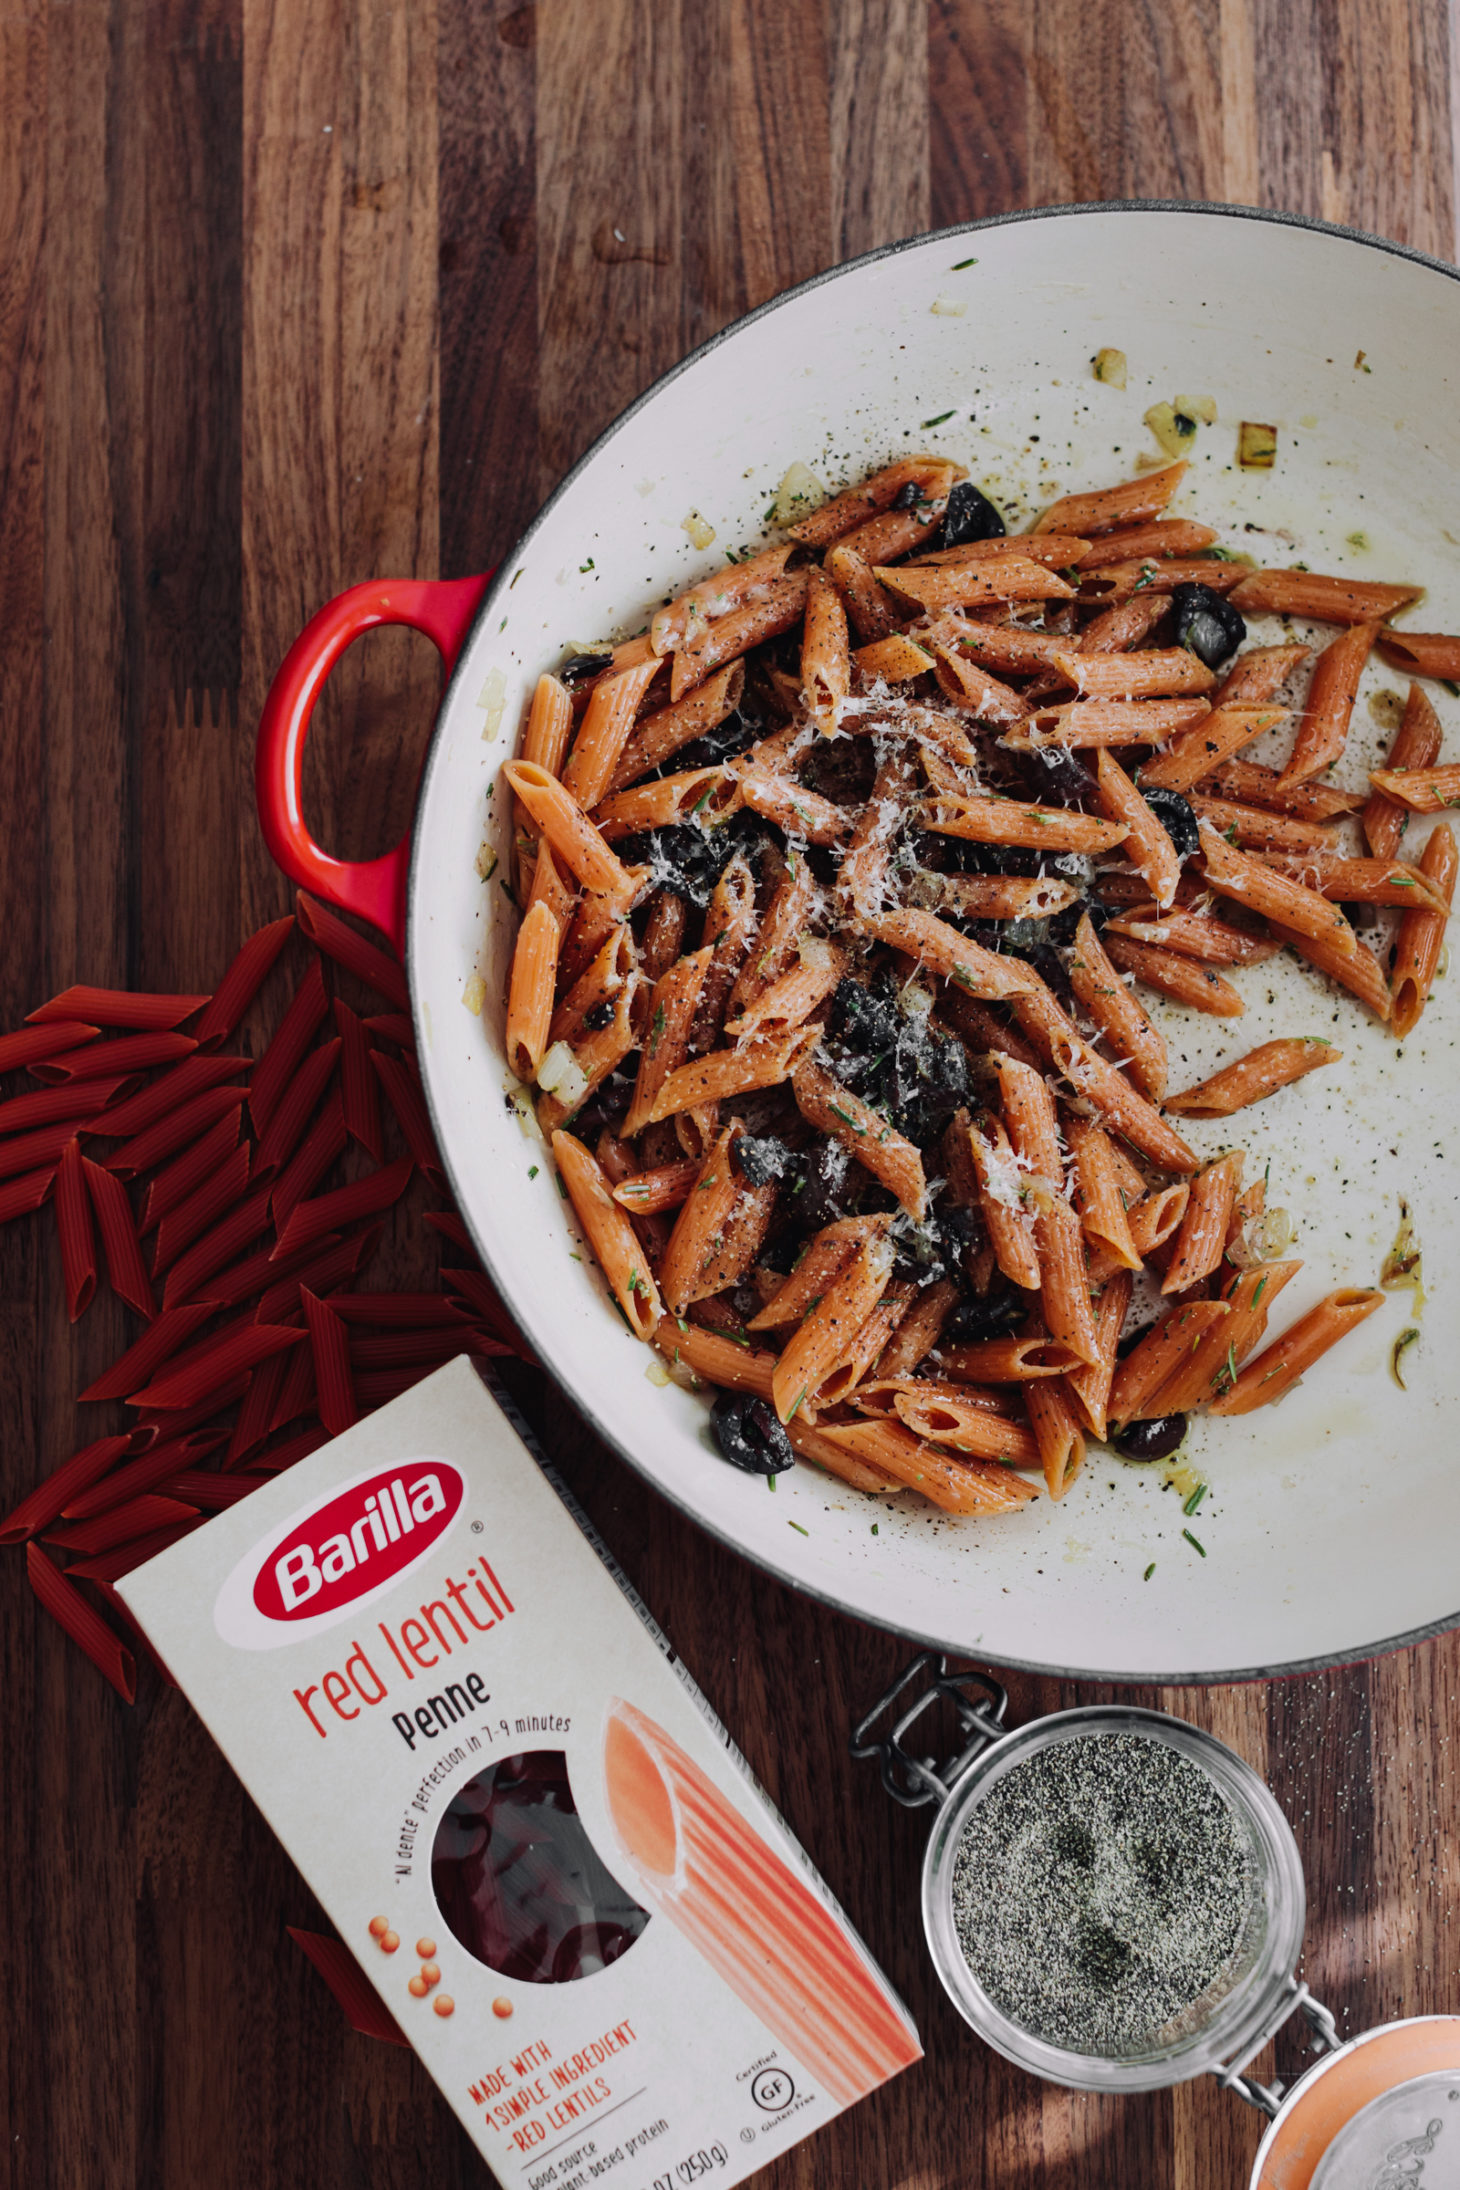 Overhead photograph of red lentil pasta with olives and a box of barilla pasta.